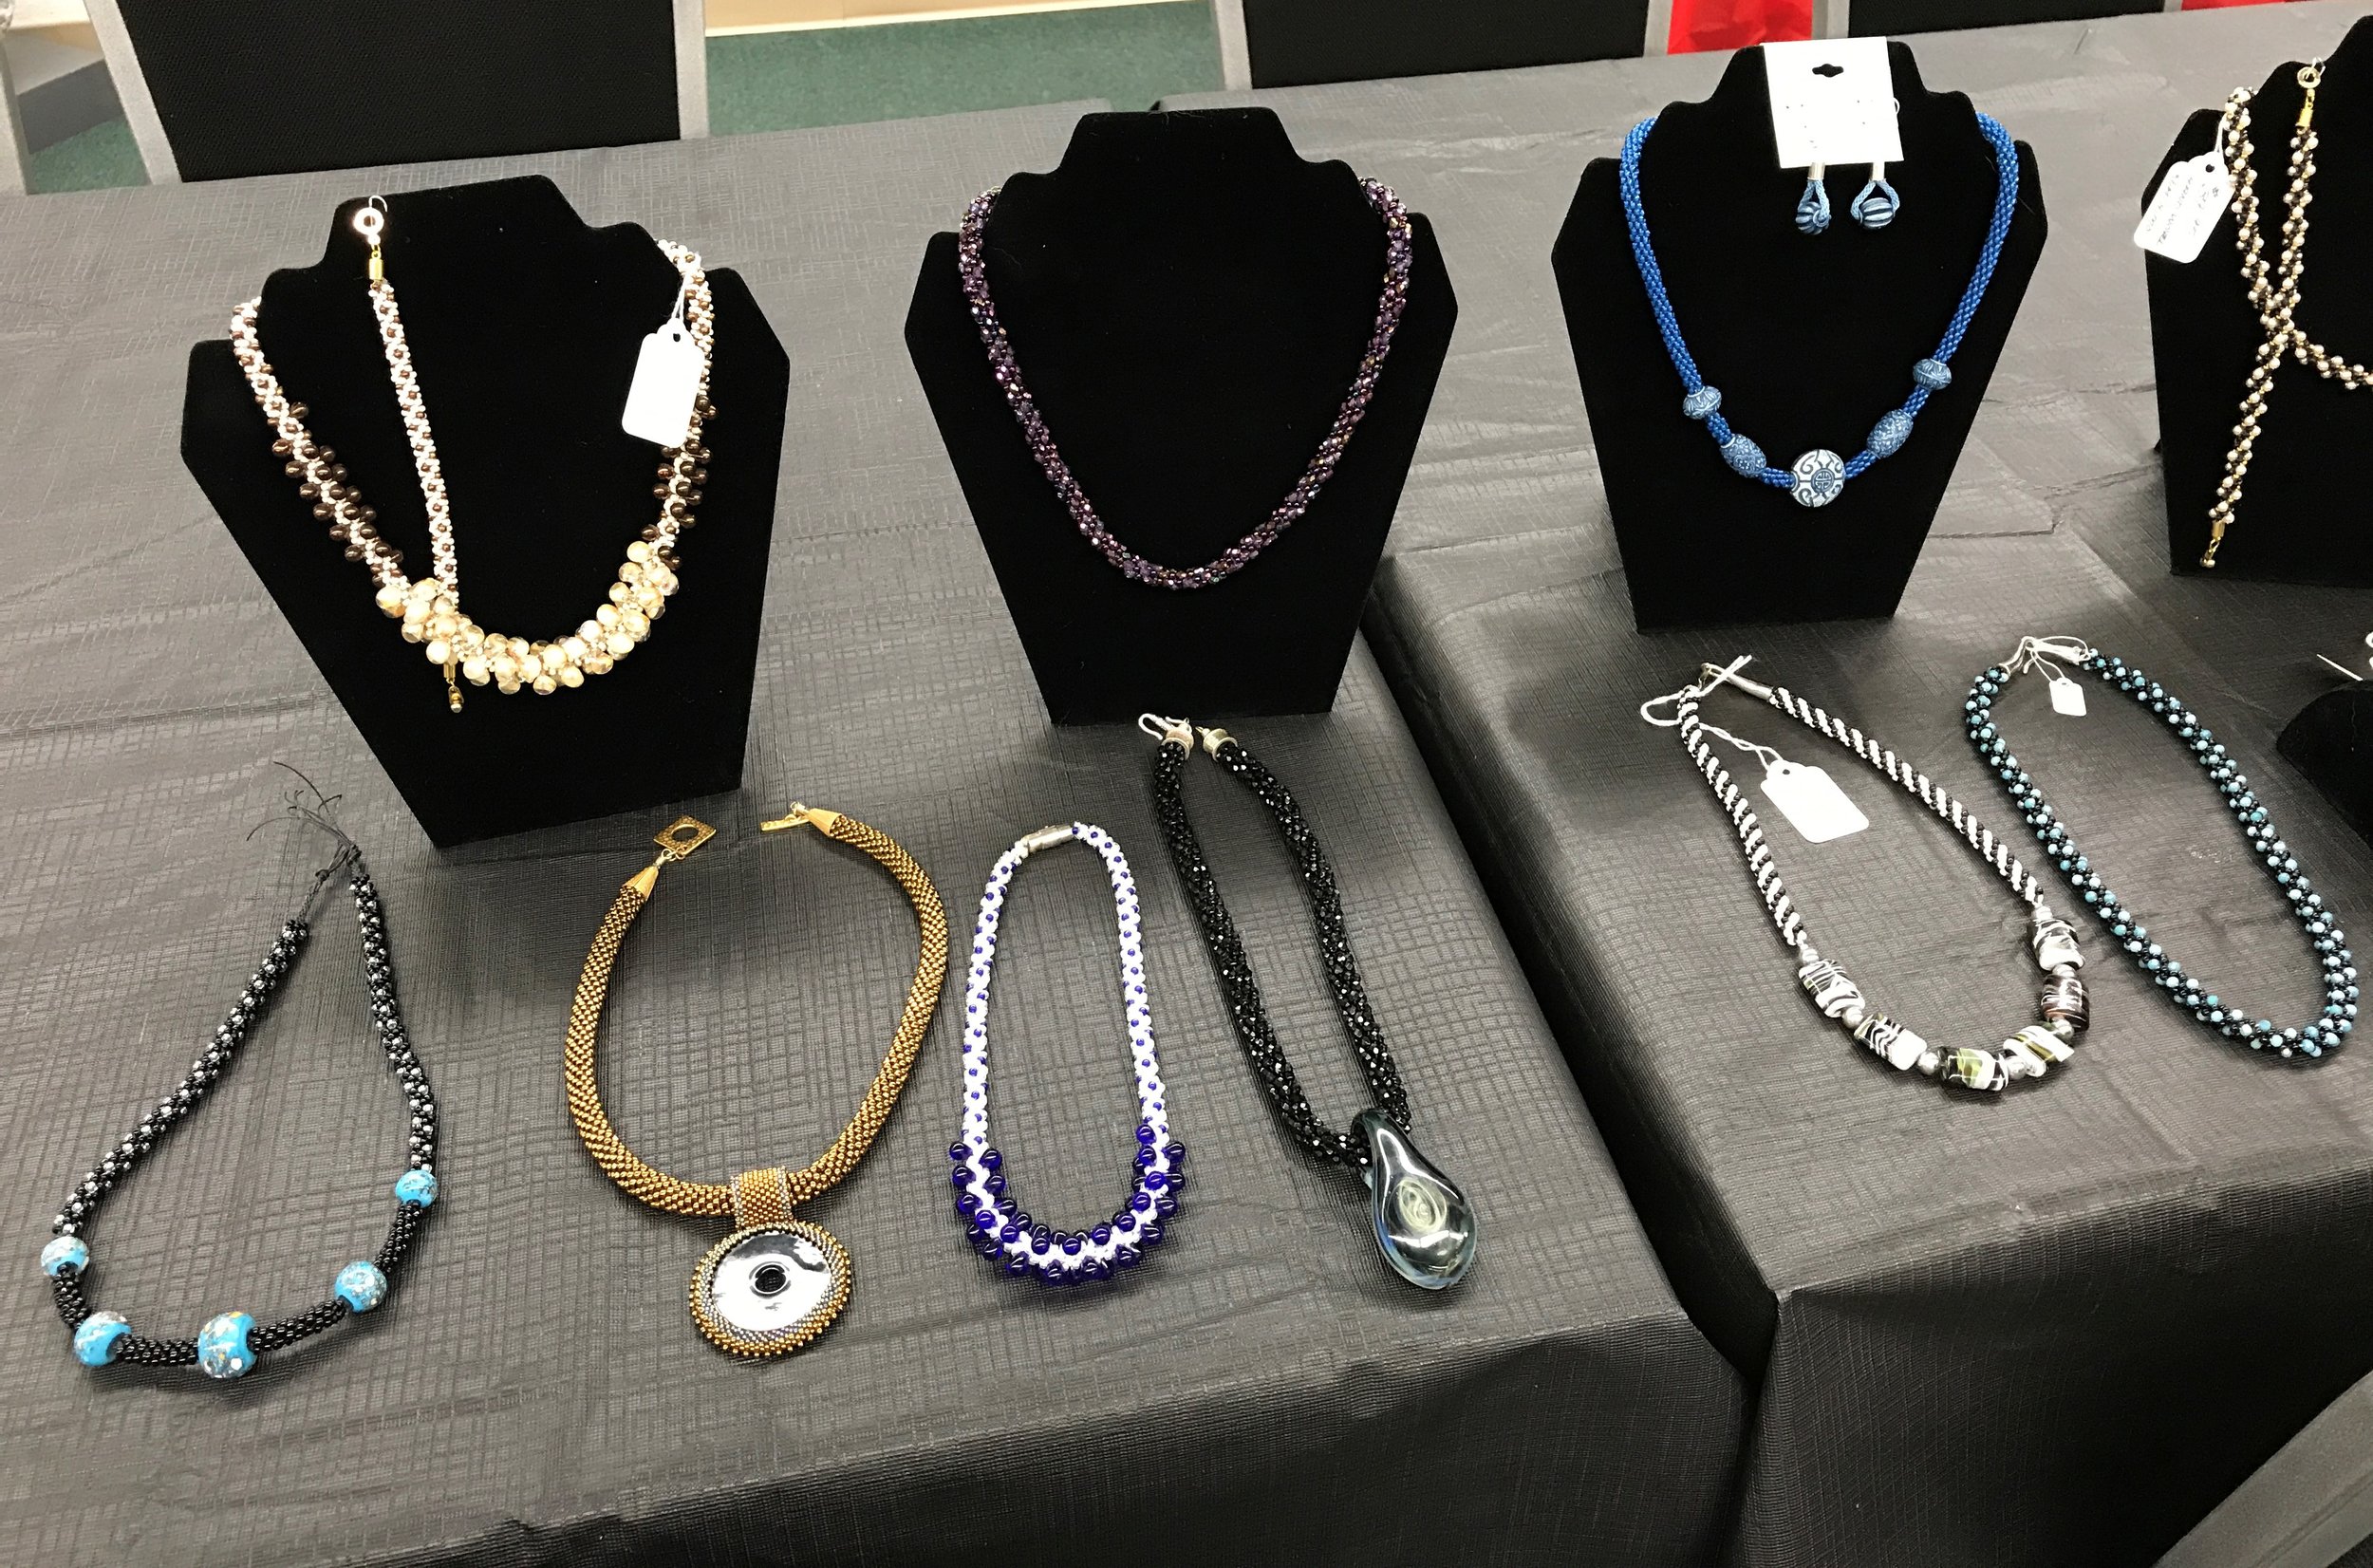 Some of the lovely pieces of jewlery